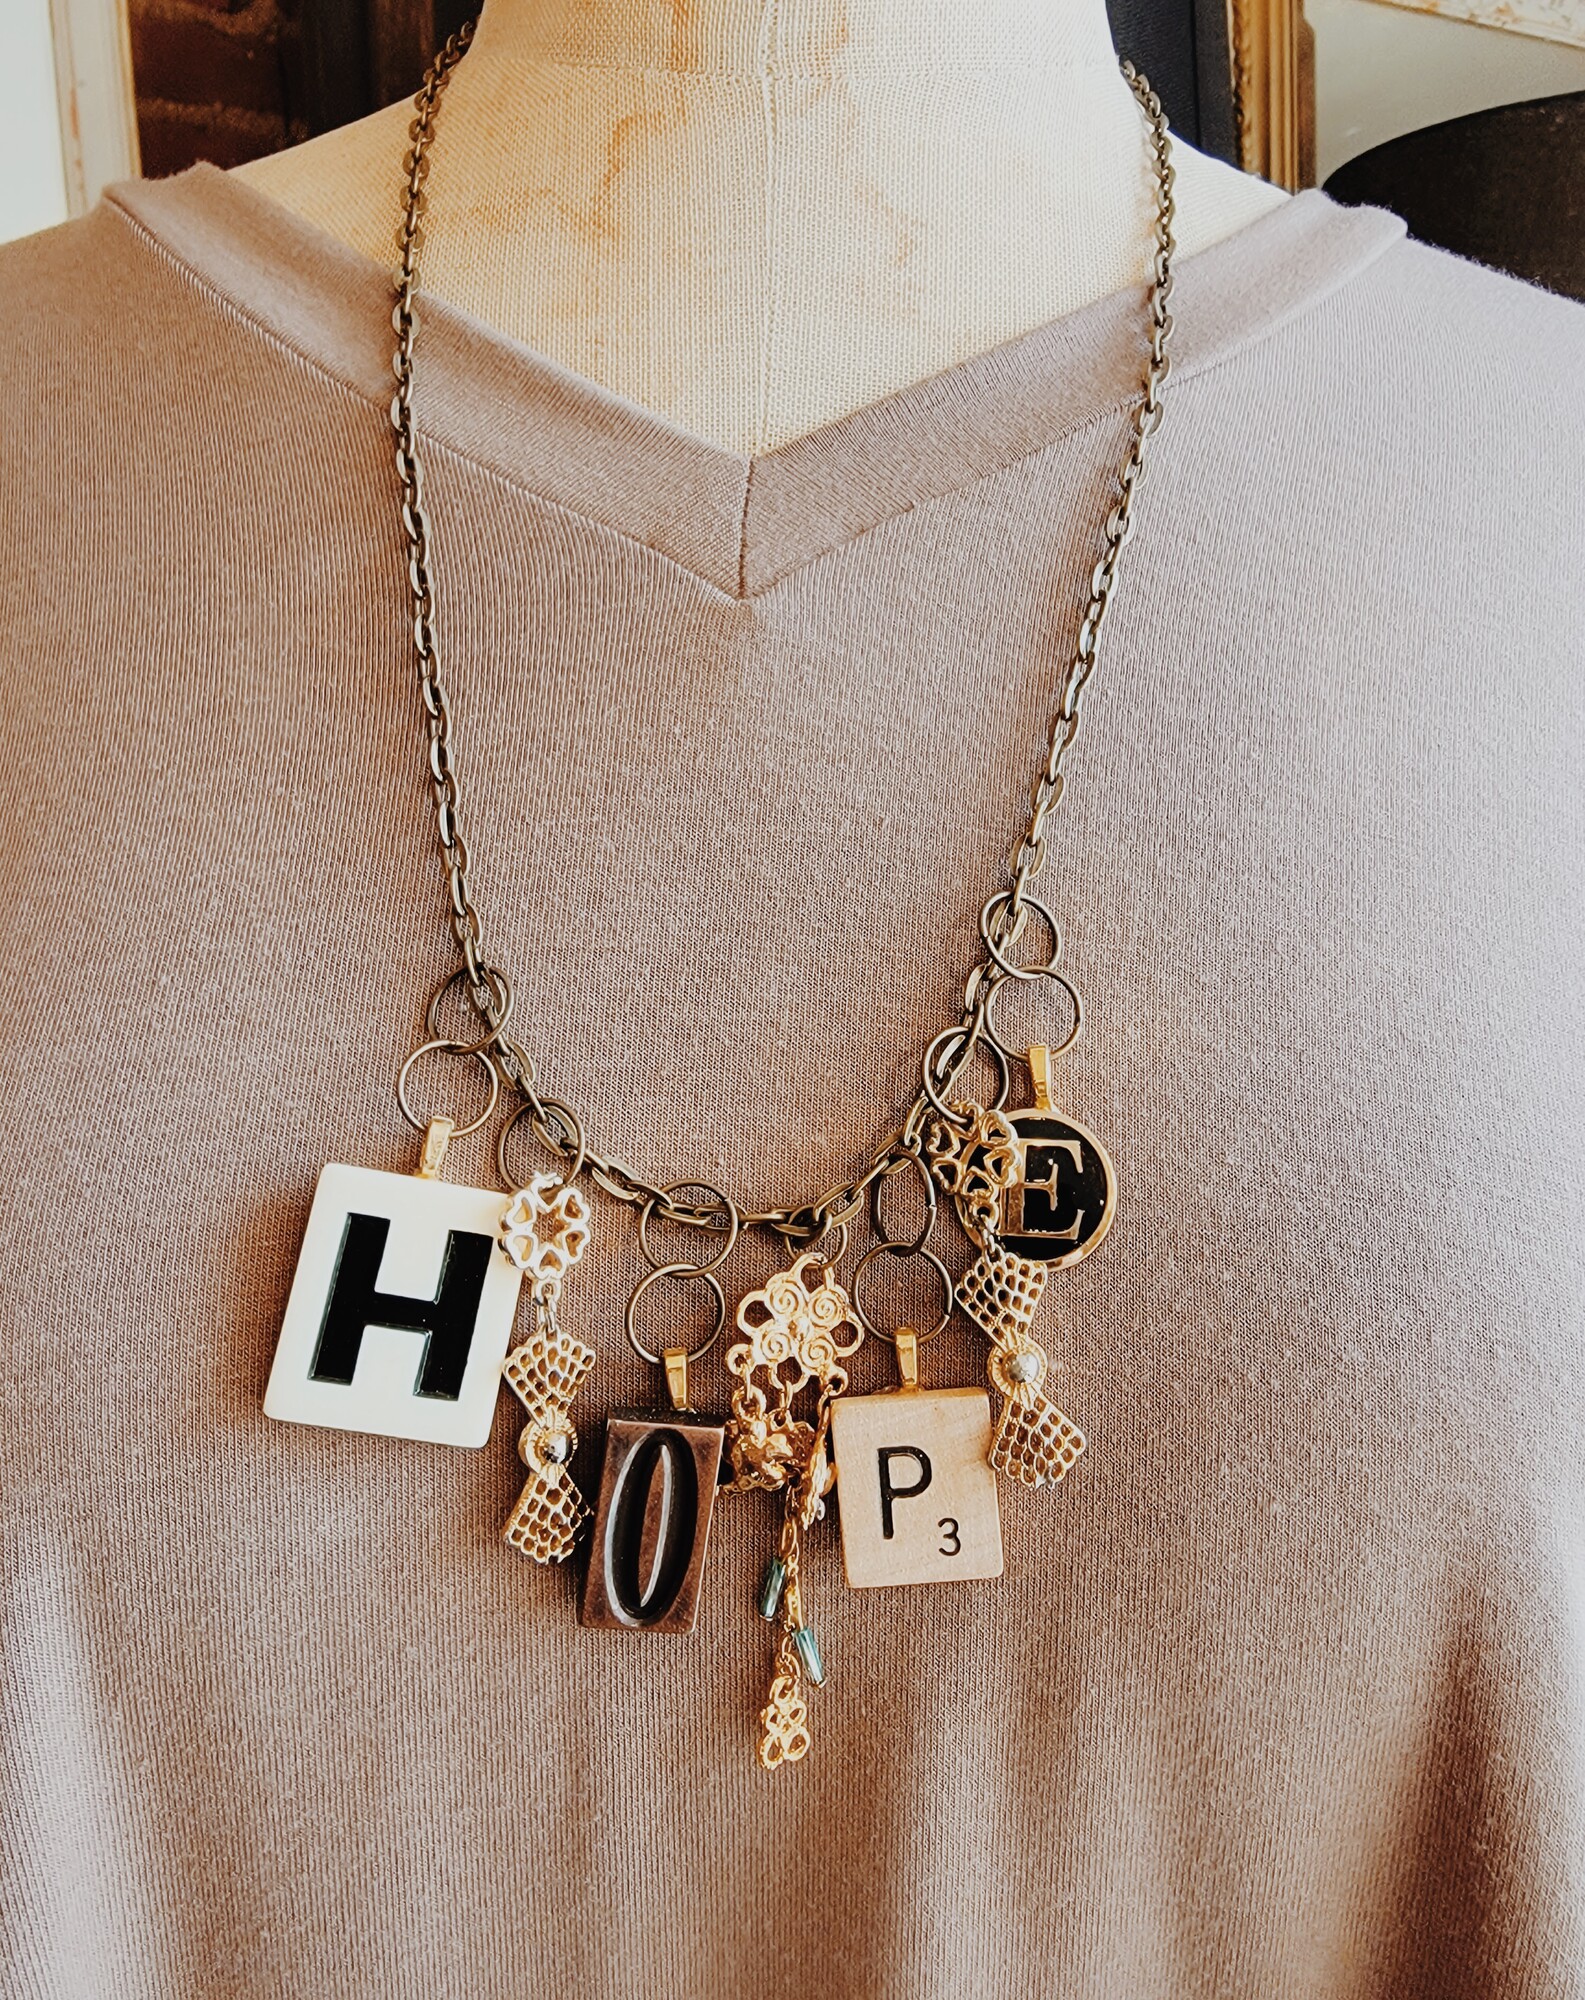 This beautiful necklace is on a 25 inch chain and spells out hope in game pieces! Also hanging from the chain are a variety of gold charms.